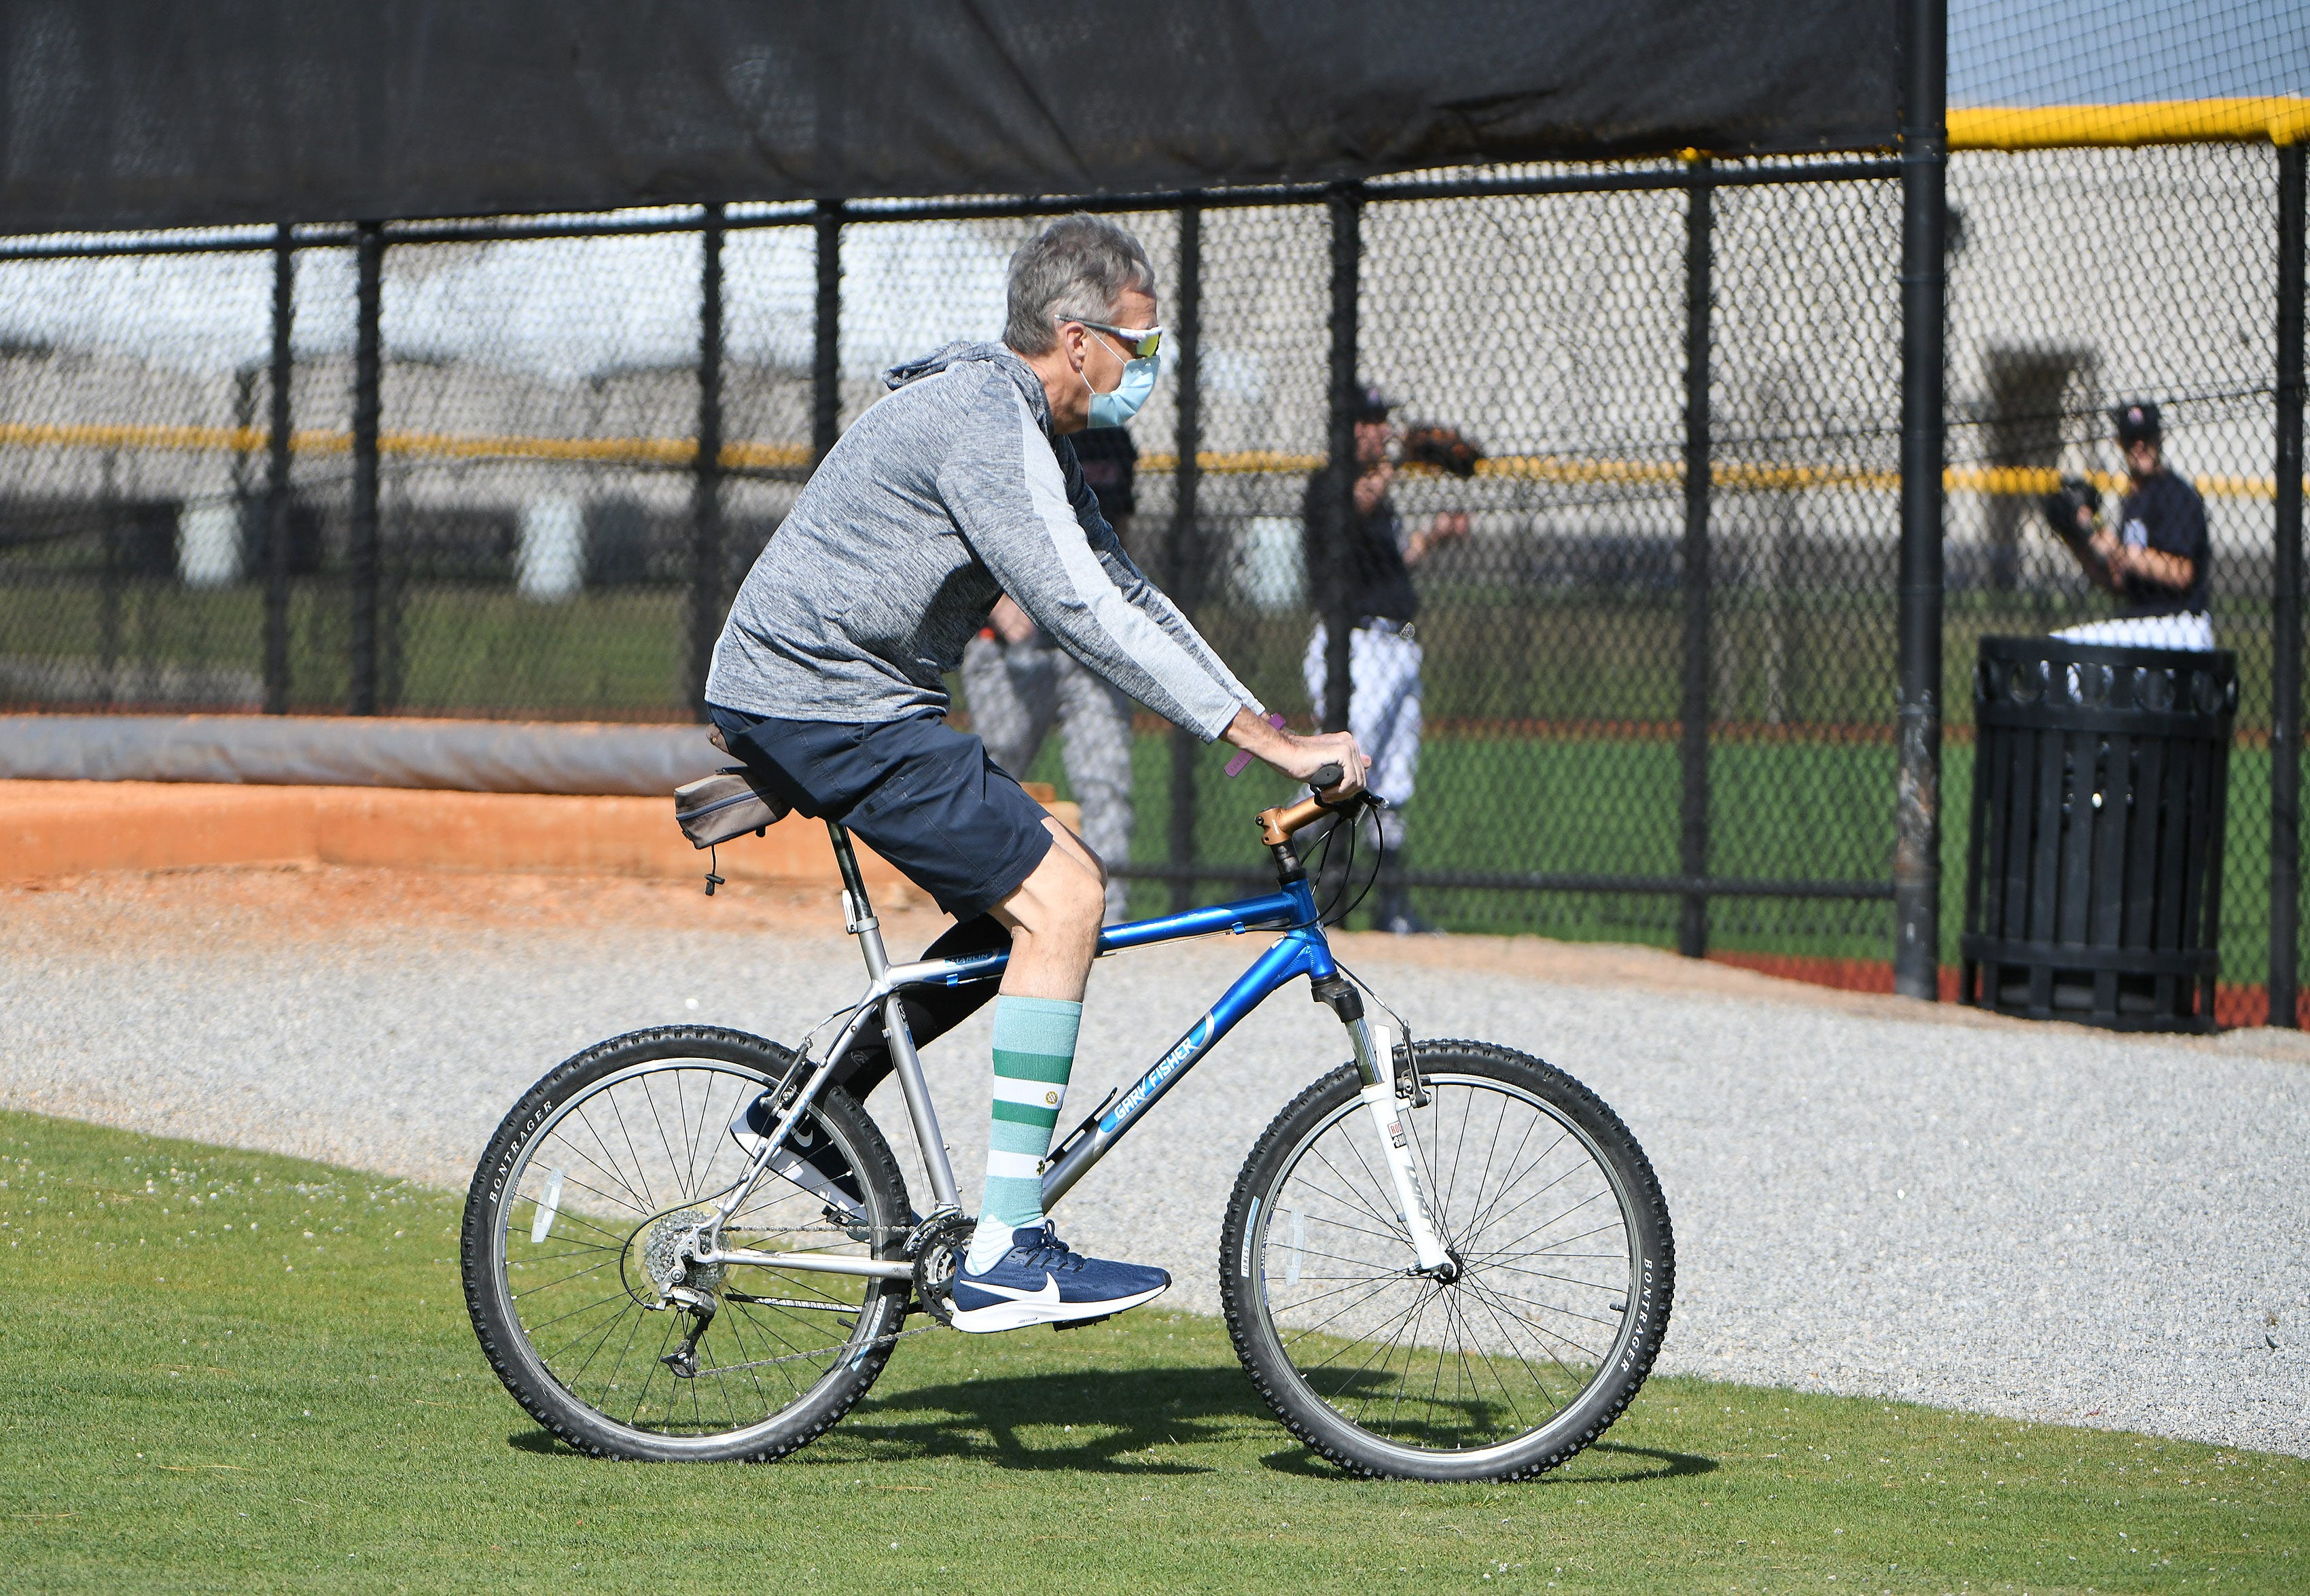 Clubhouse manager Jim Schmakel rides his bicycle to get where he needs to go on the practice fields.